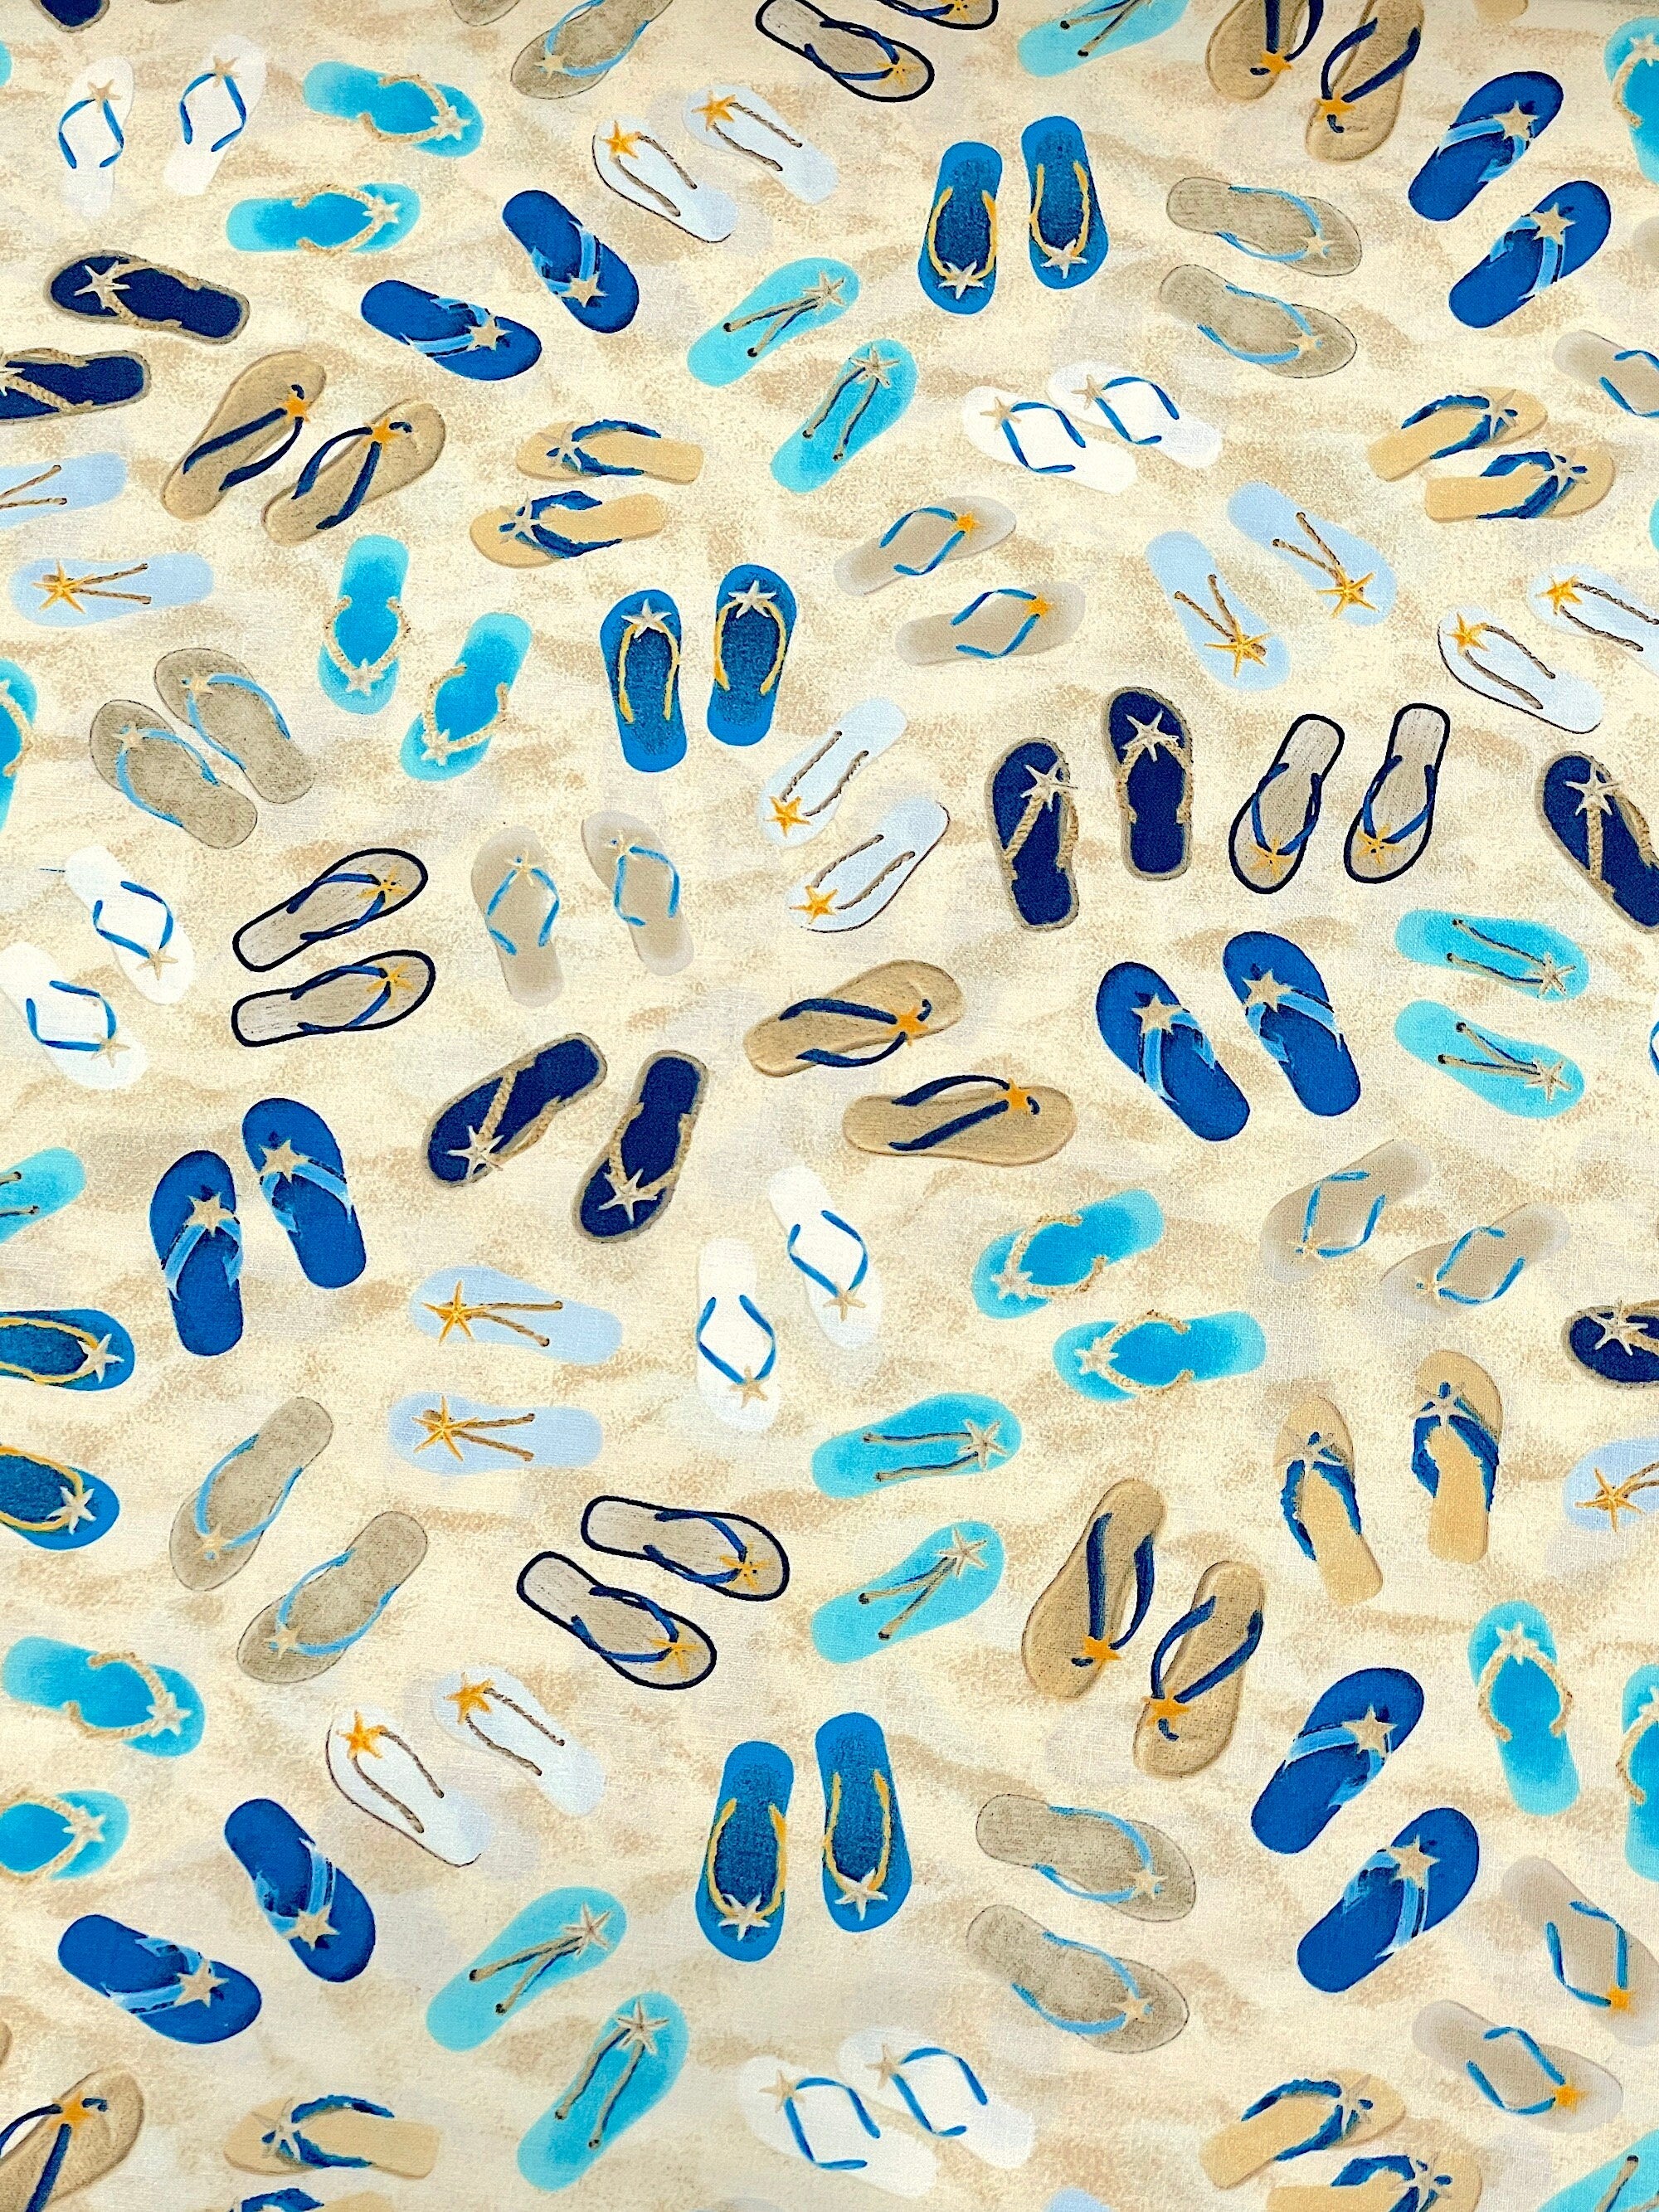 This fabric has a sand background and is covered with flips flops. The flip flops are blue, beige and white.